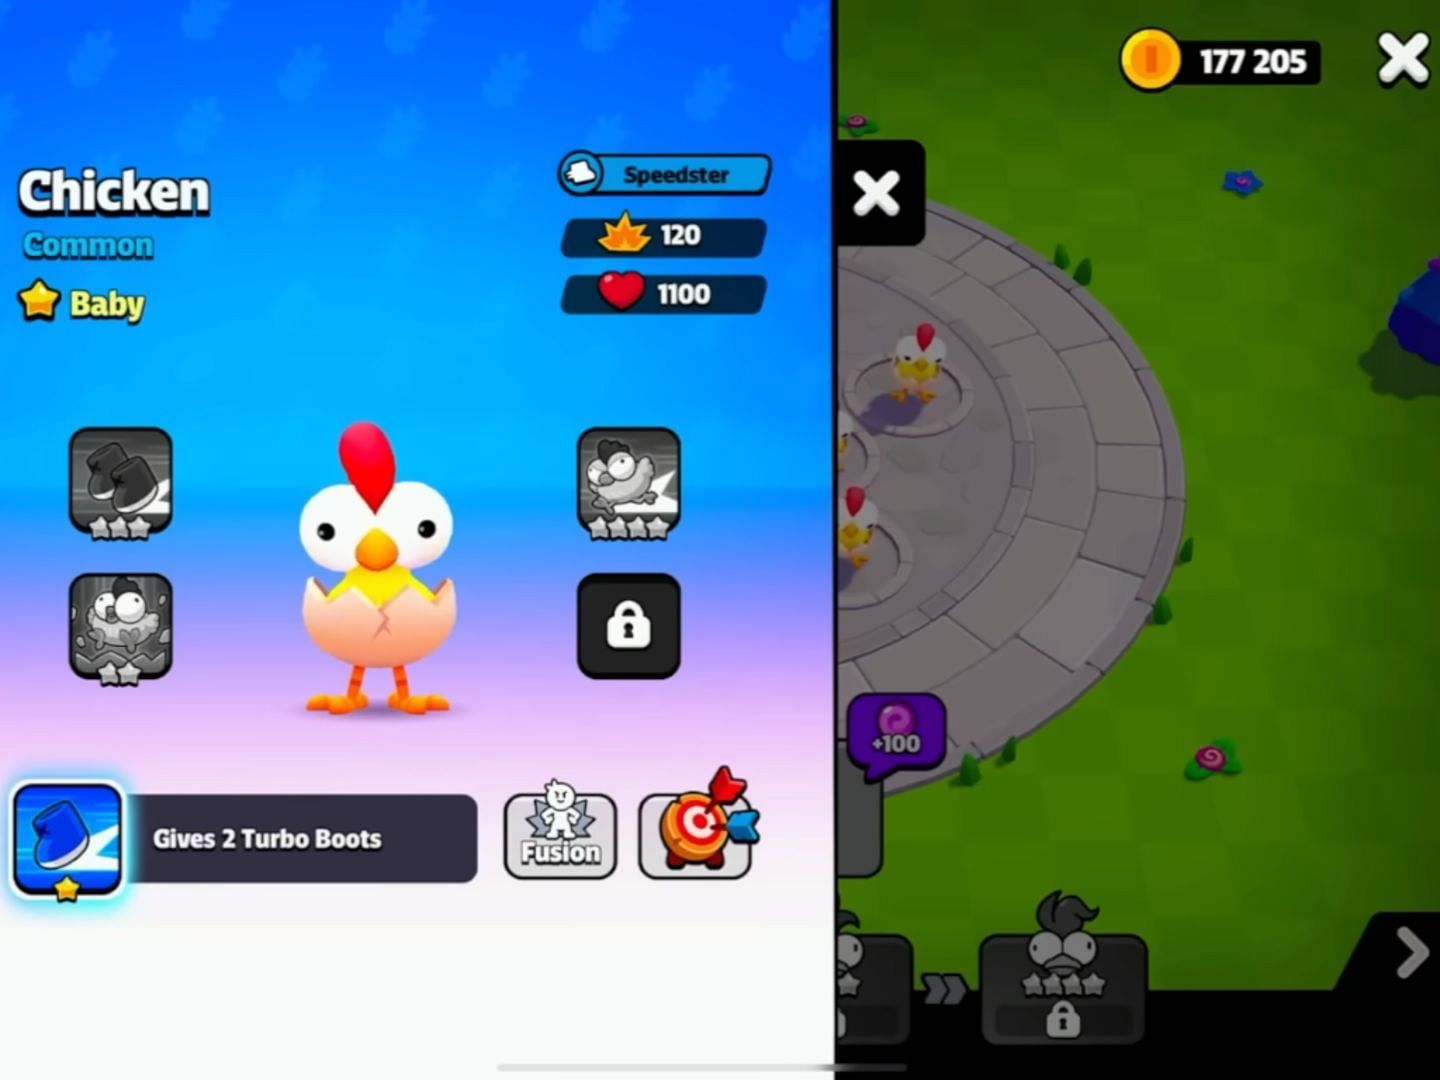 Chicken (Image via Supercell)